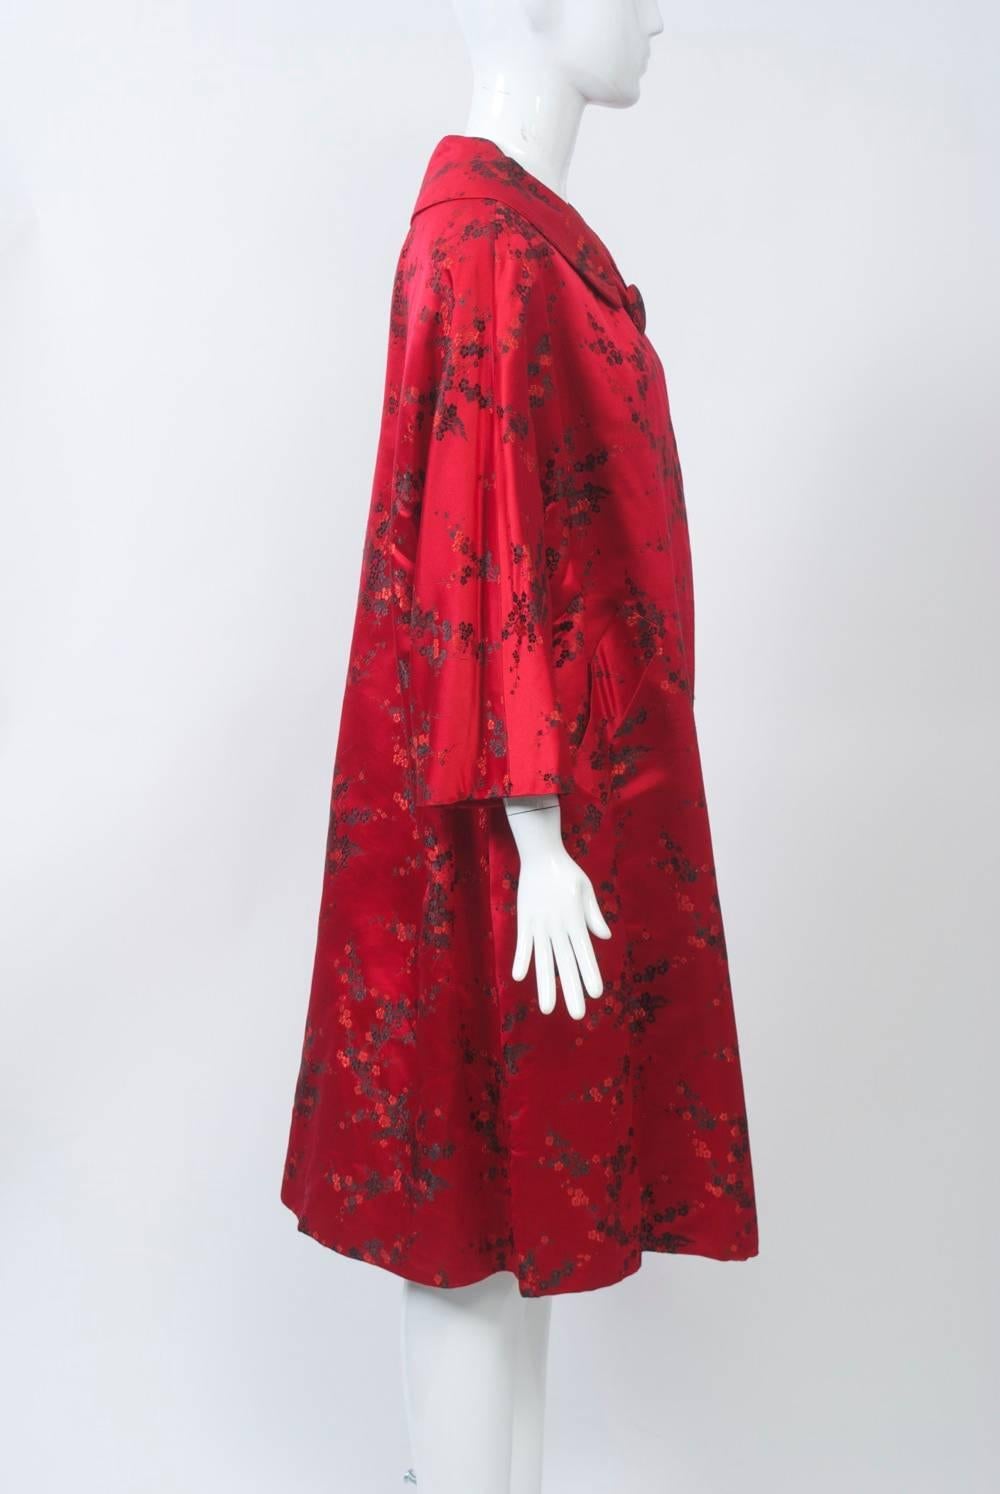 Red satin brocade evening coat with dainty black floral design featuring a spread collar and one large self button at the neck. Dolman, three-quarter sleeves. Easy fit, slash pockets. Red satin lining. Looks unworn.